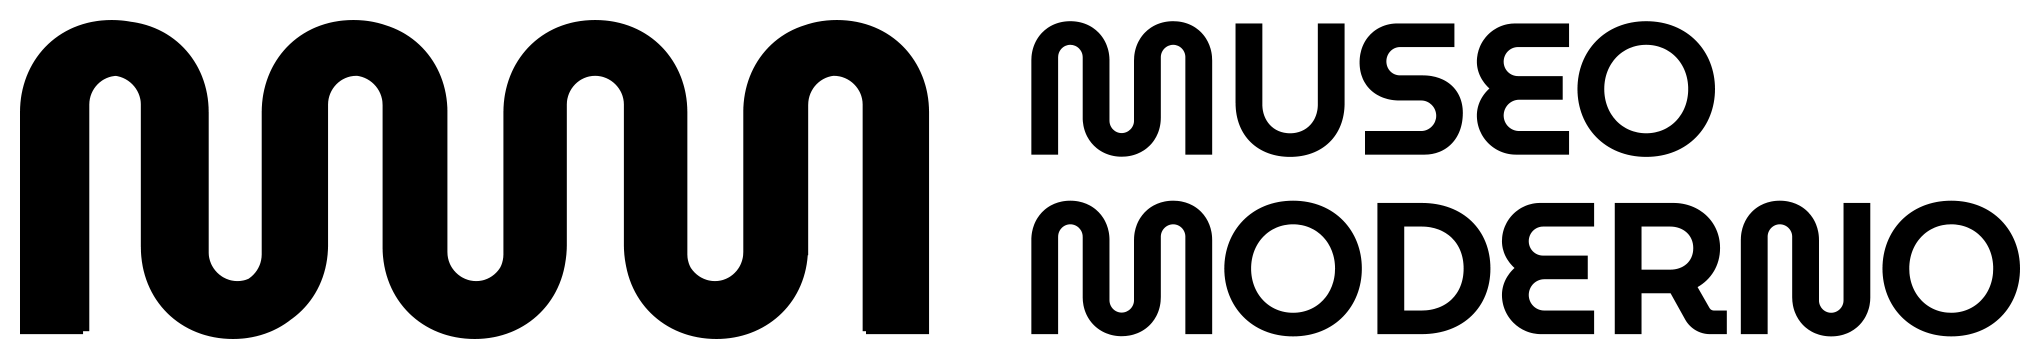 museo_moderno_buenos_aires_logo.png